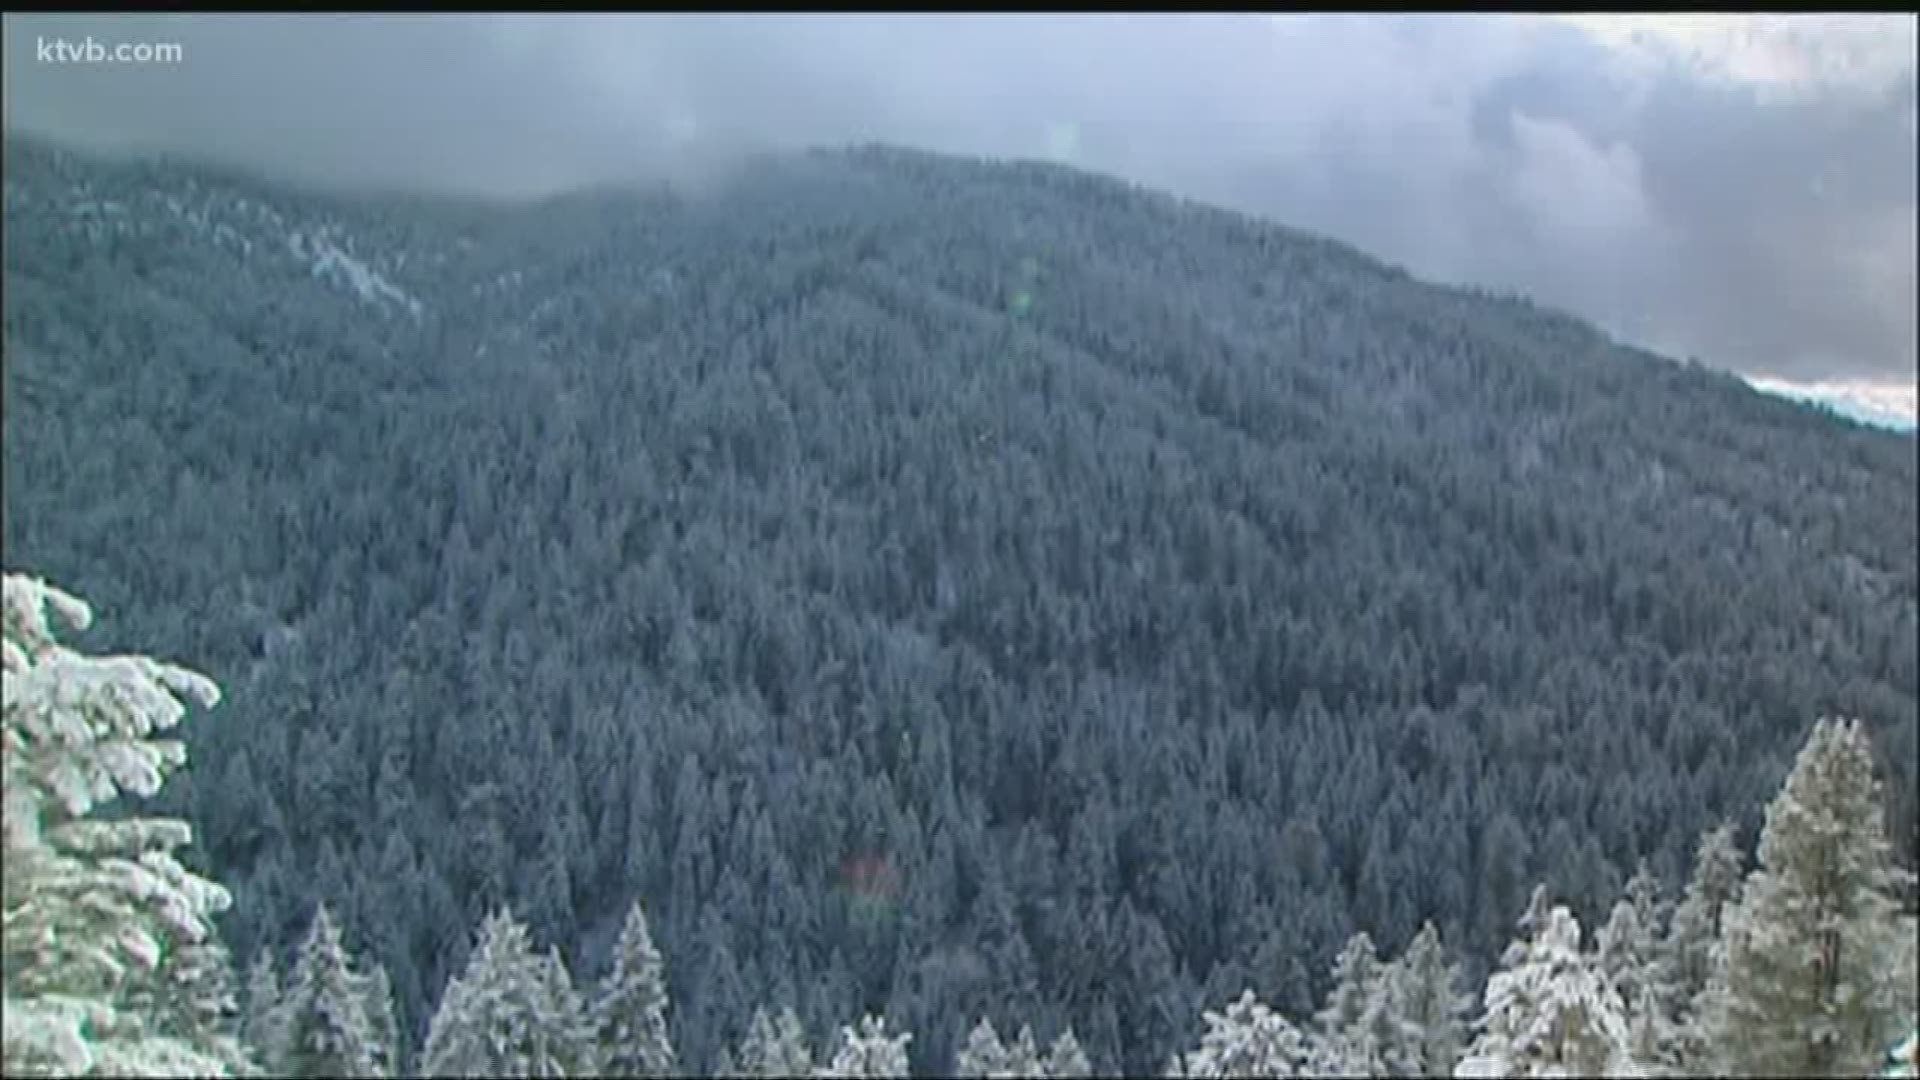 The exploration project could now move forward without the USFS holding an open meeting.